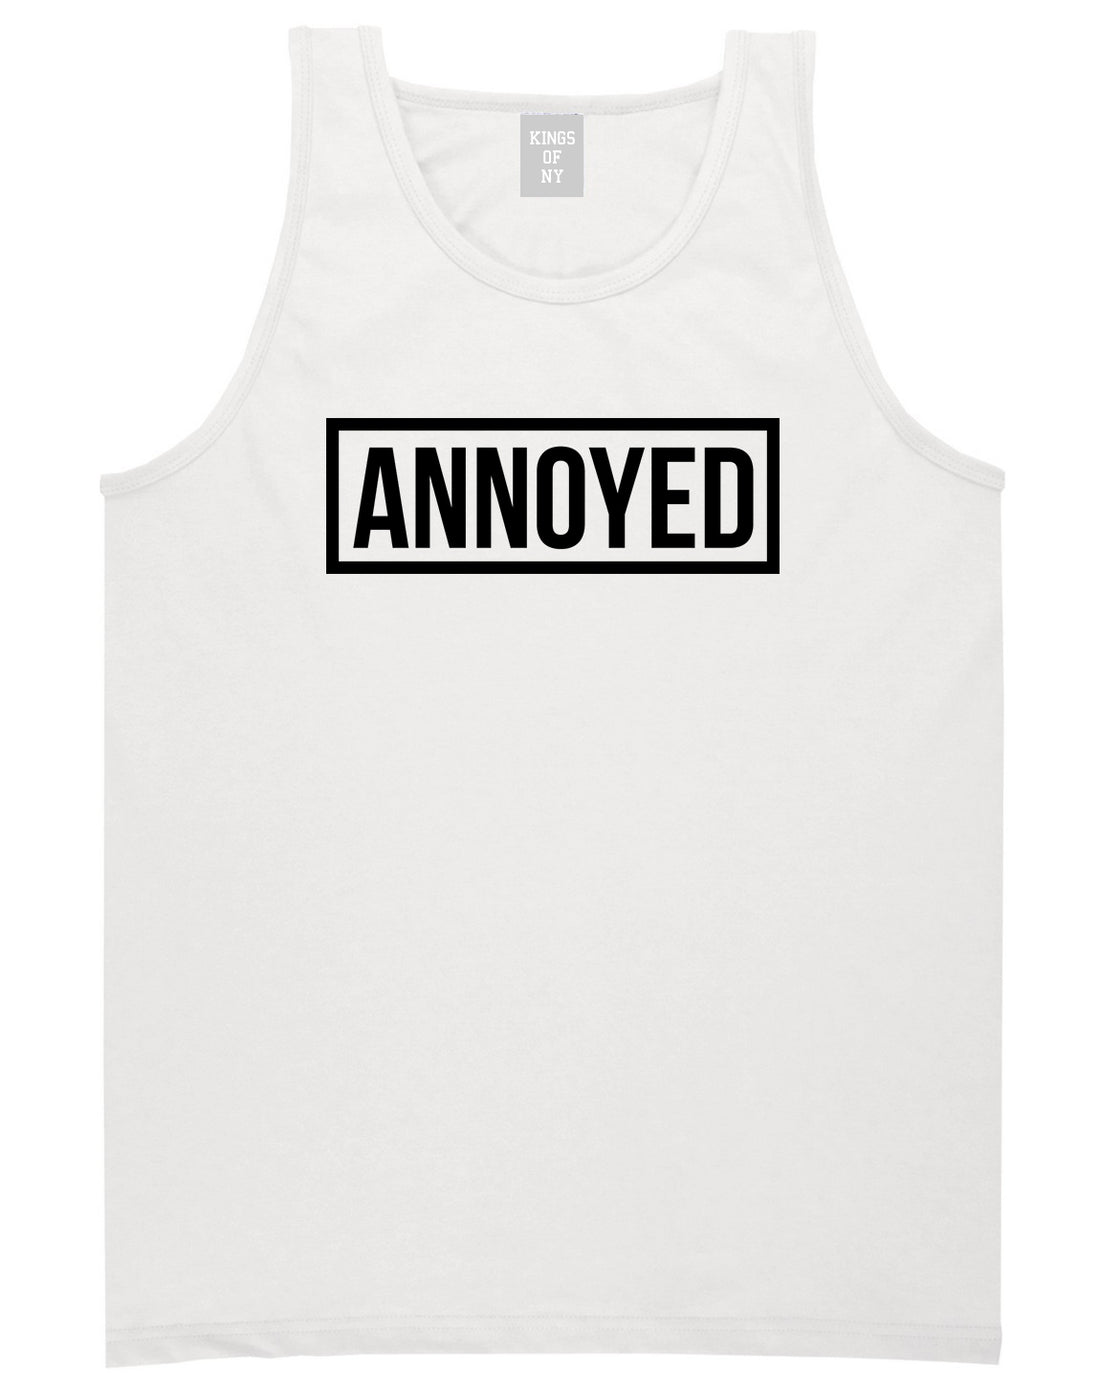 Annoyed White Tank Top Shirt by Kings Of NY